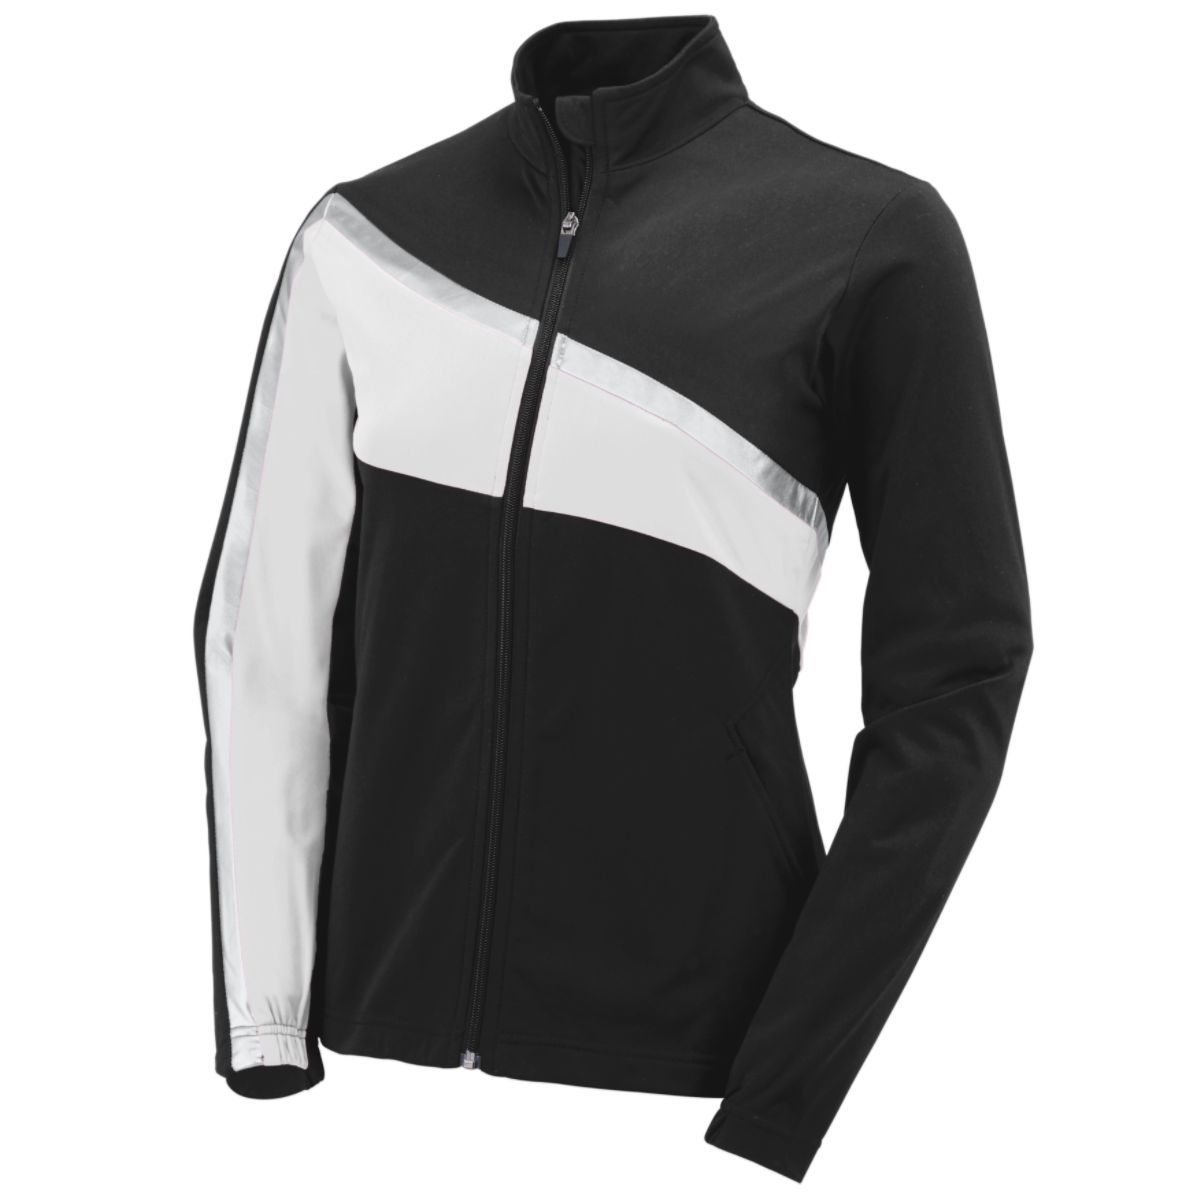 Augusta Sportswear Ladies Aurora Jacket in Black/White/Metallic Silver  -Part of the Ladies, Ladies-Jacket, Augusta-Products, Outerwear product lines at KanaleyCreations.com